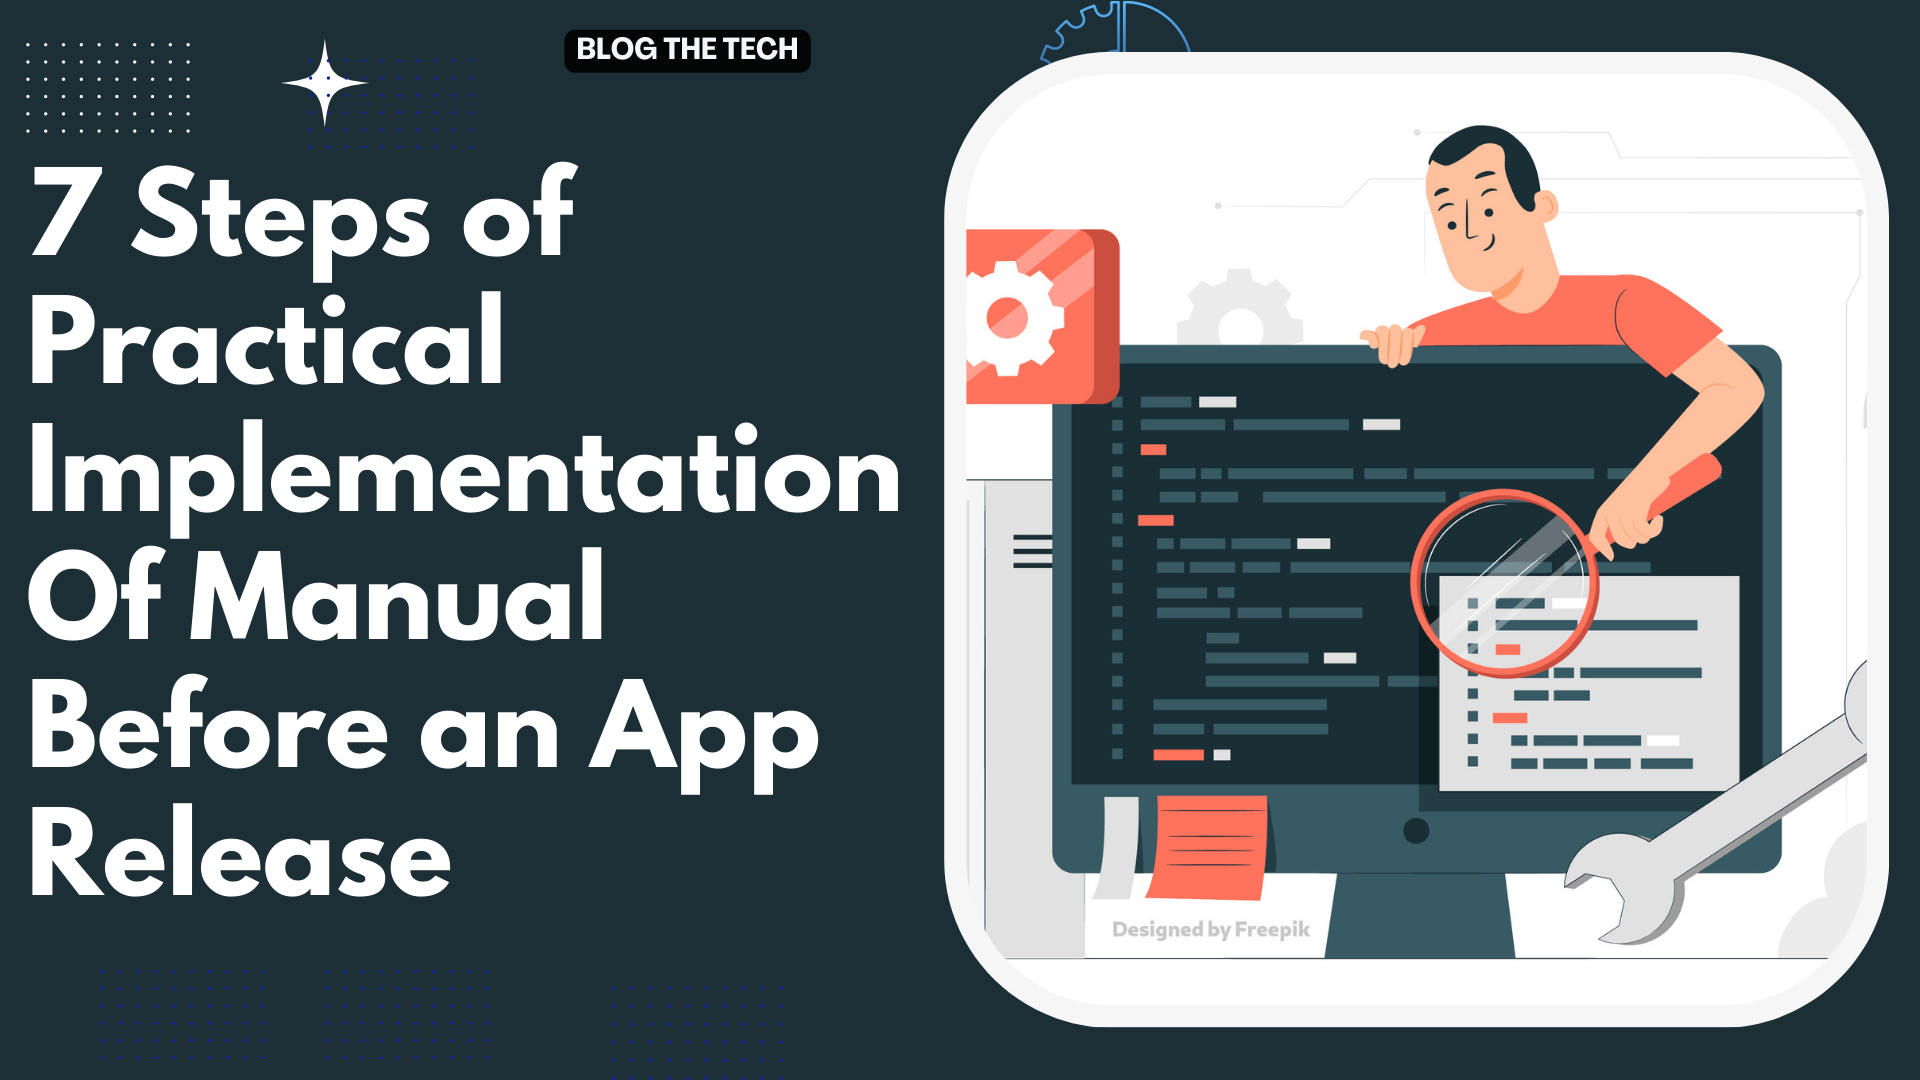 7 Steps of Practical Implementation Of Manual Before an App Release